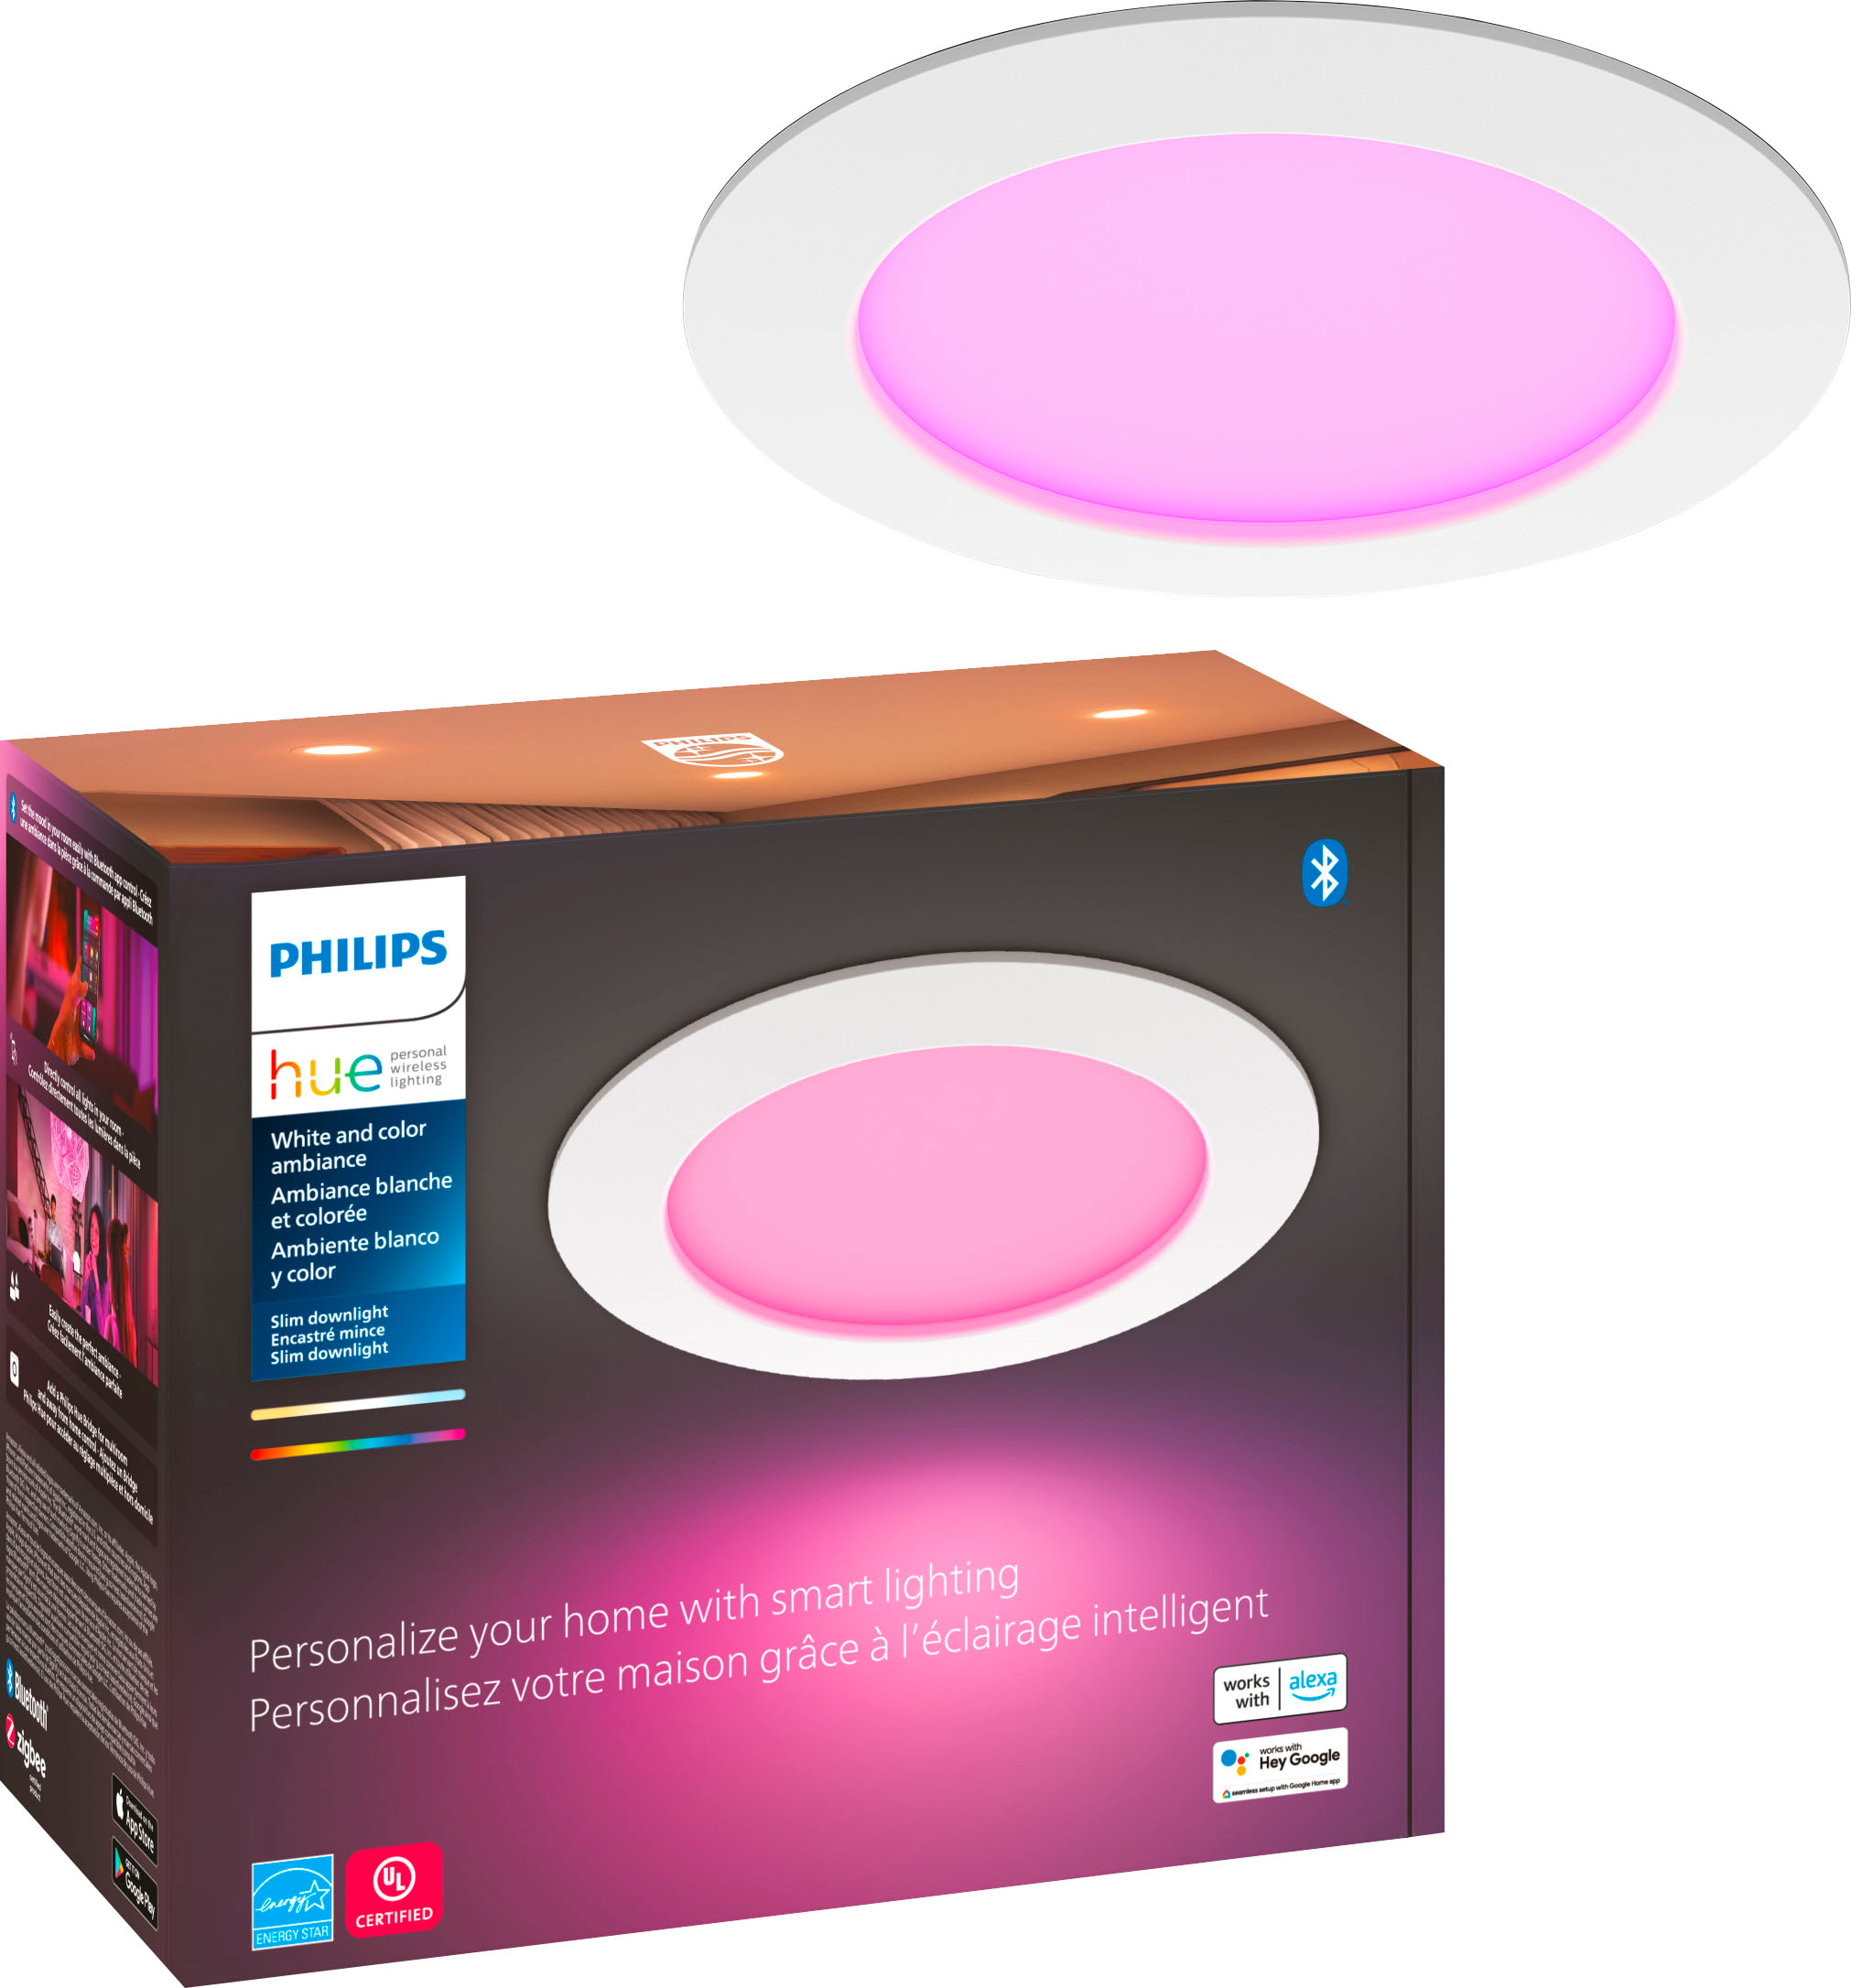 Philips Hue White and Color Ambiance Slim Downlight 6" White 579573 - Best